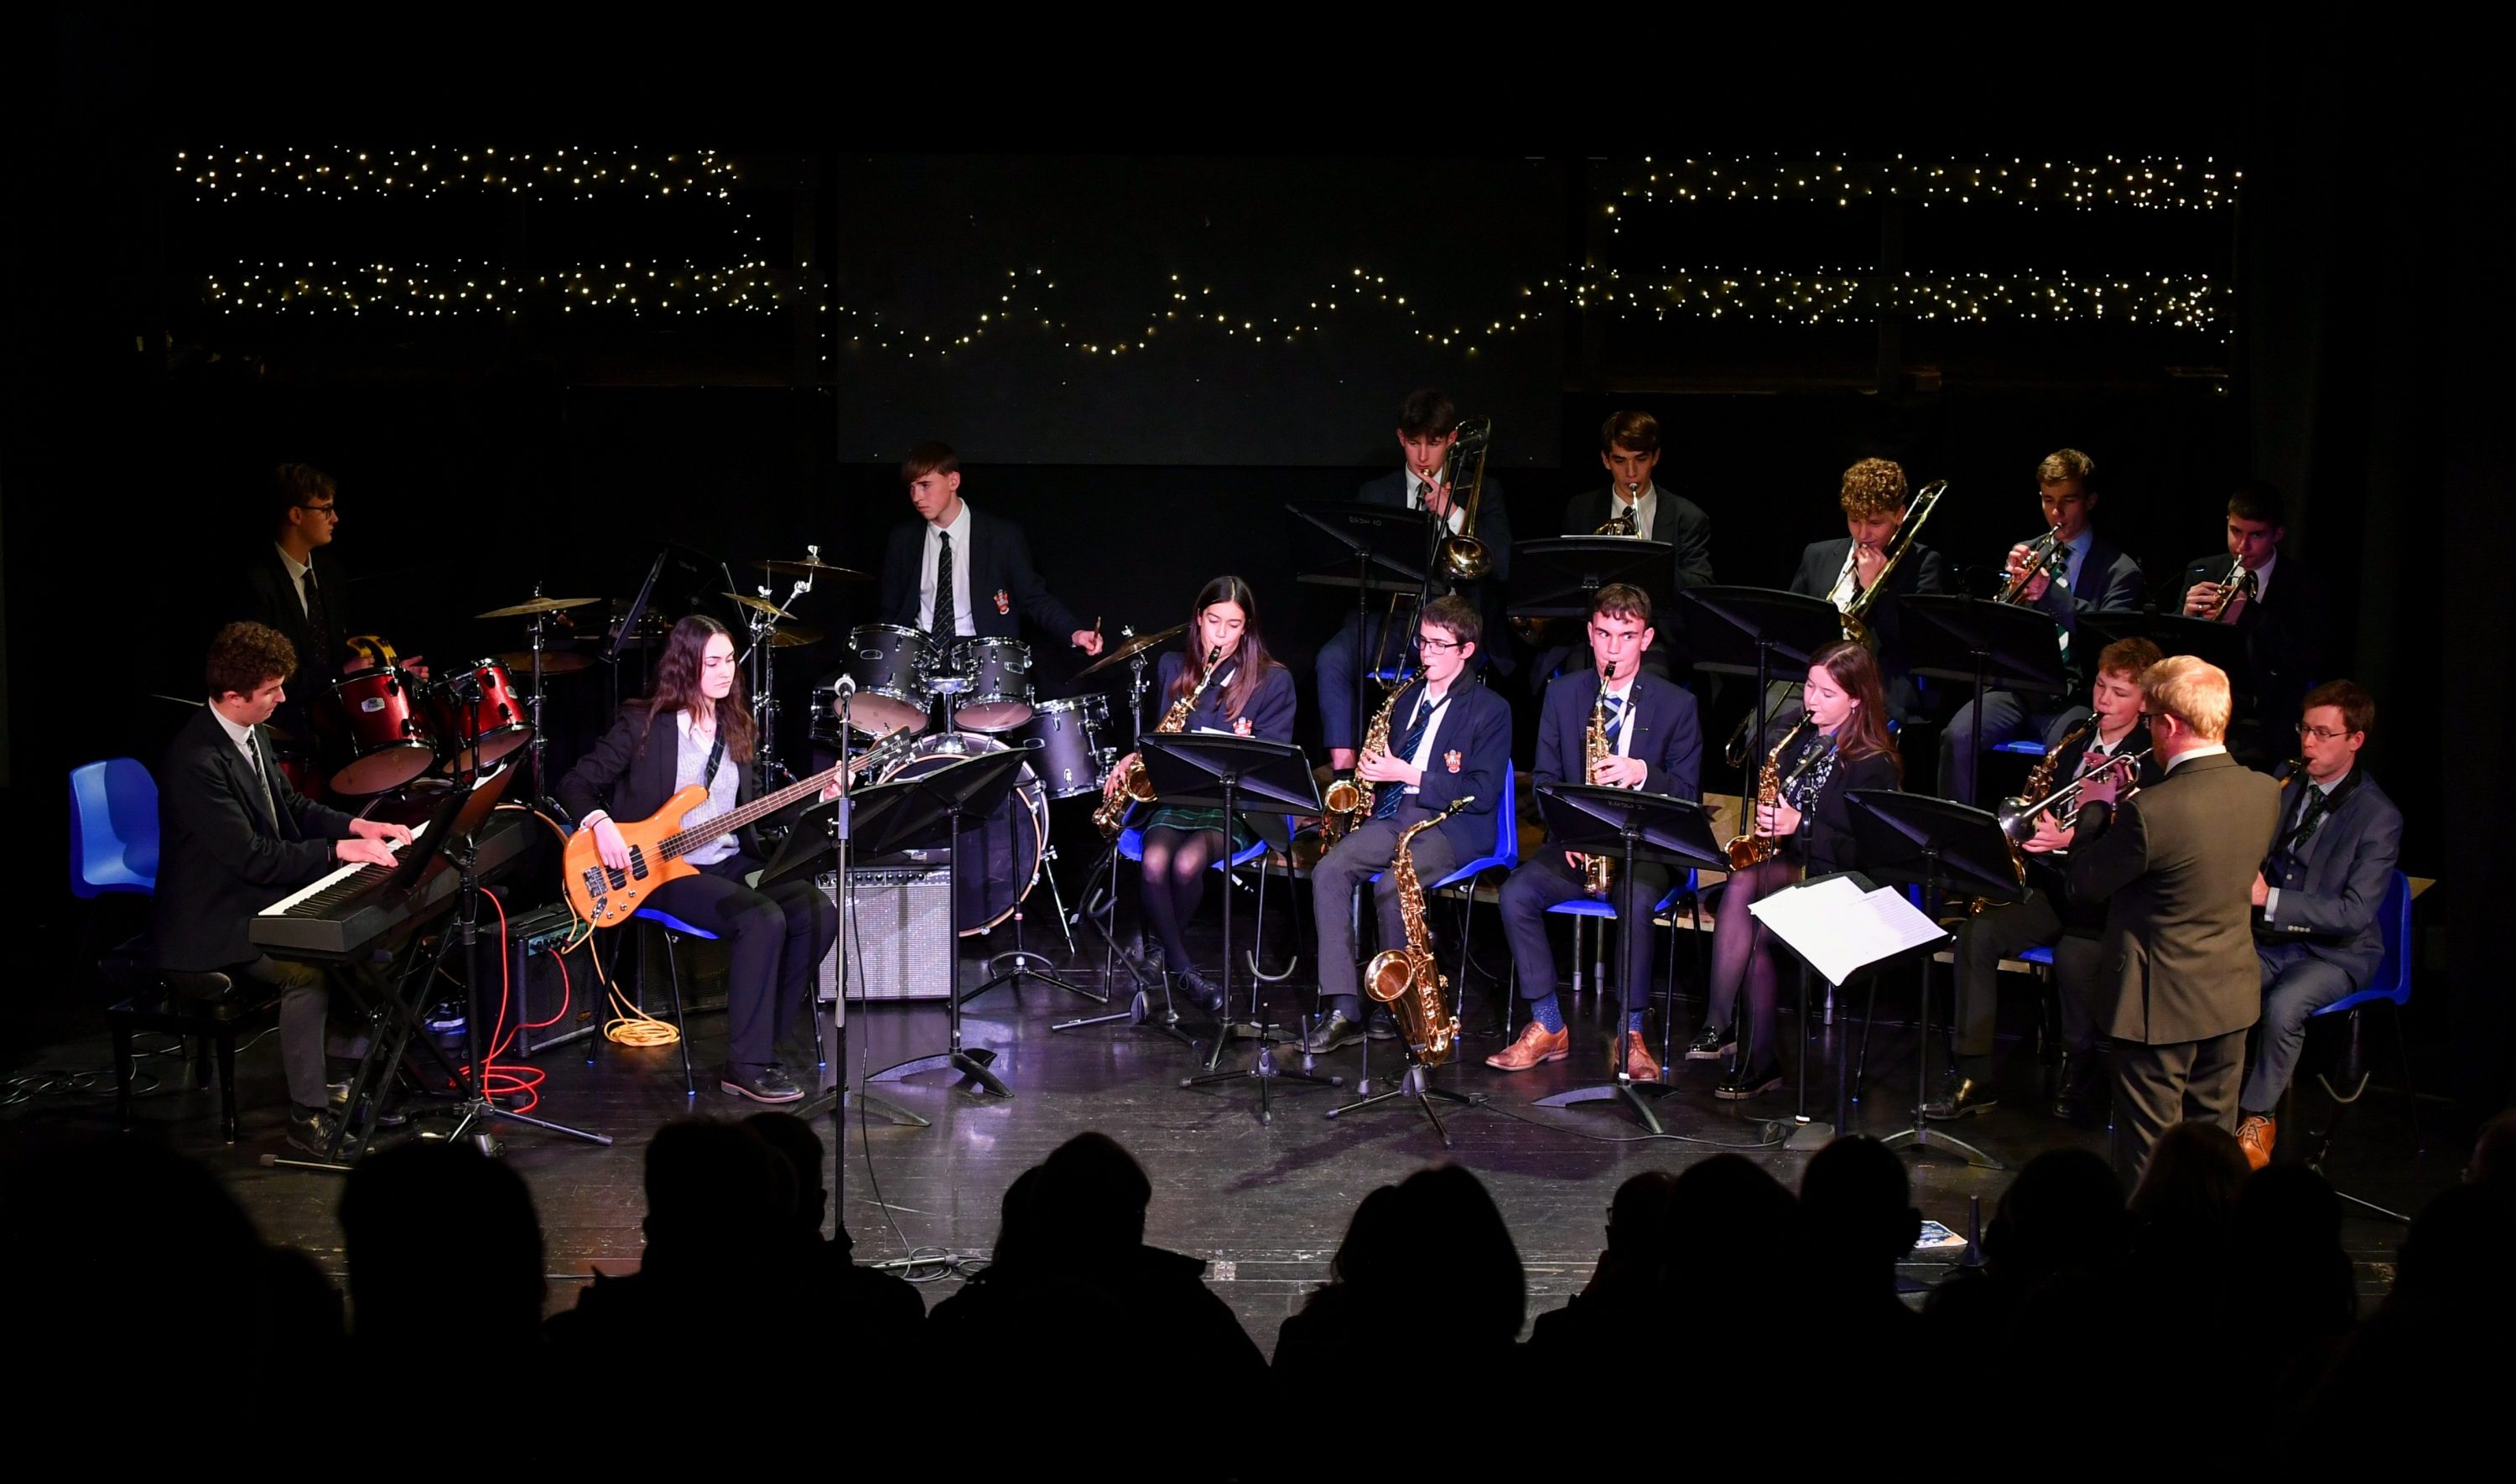 Jazzing it up - ‘Christmas with the Big Band’